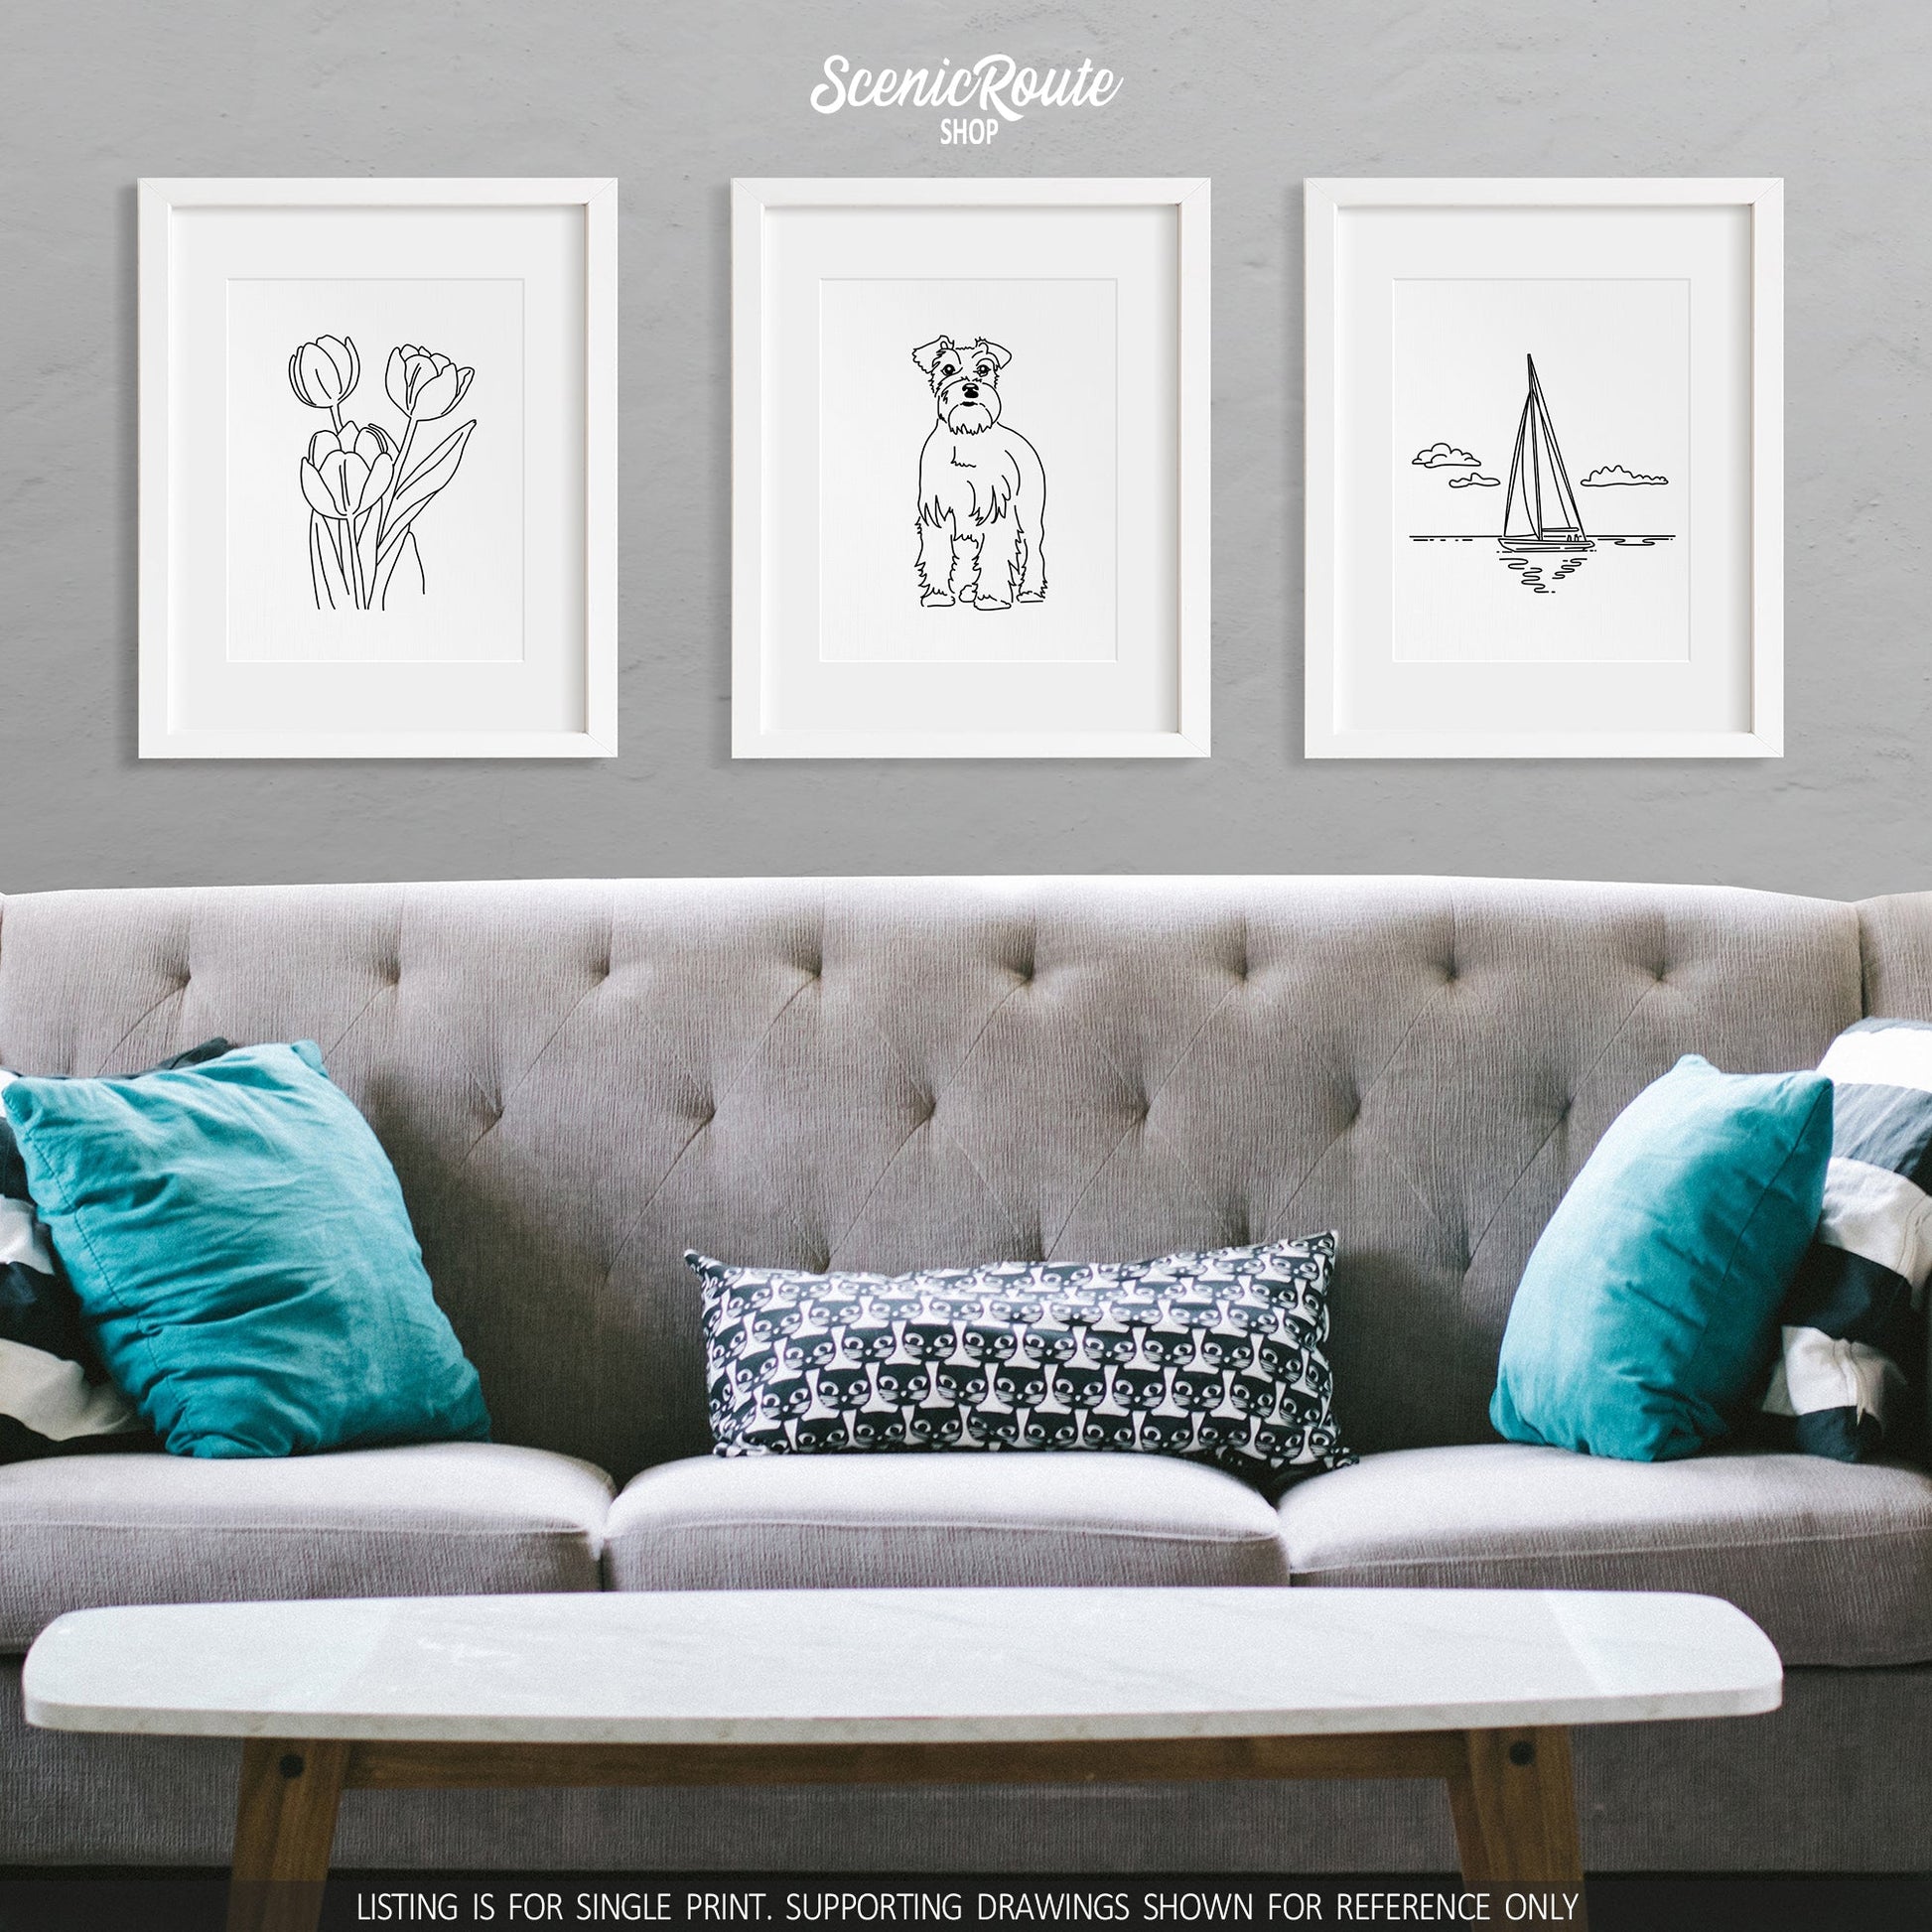 A group of three framed drawings on a gray wall above a couch with pillows and a coffee table. The line art drawings include Tulip Flowers, a Schnauzer dog, and Sailing